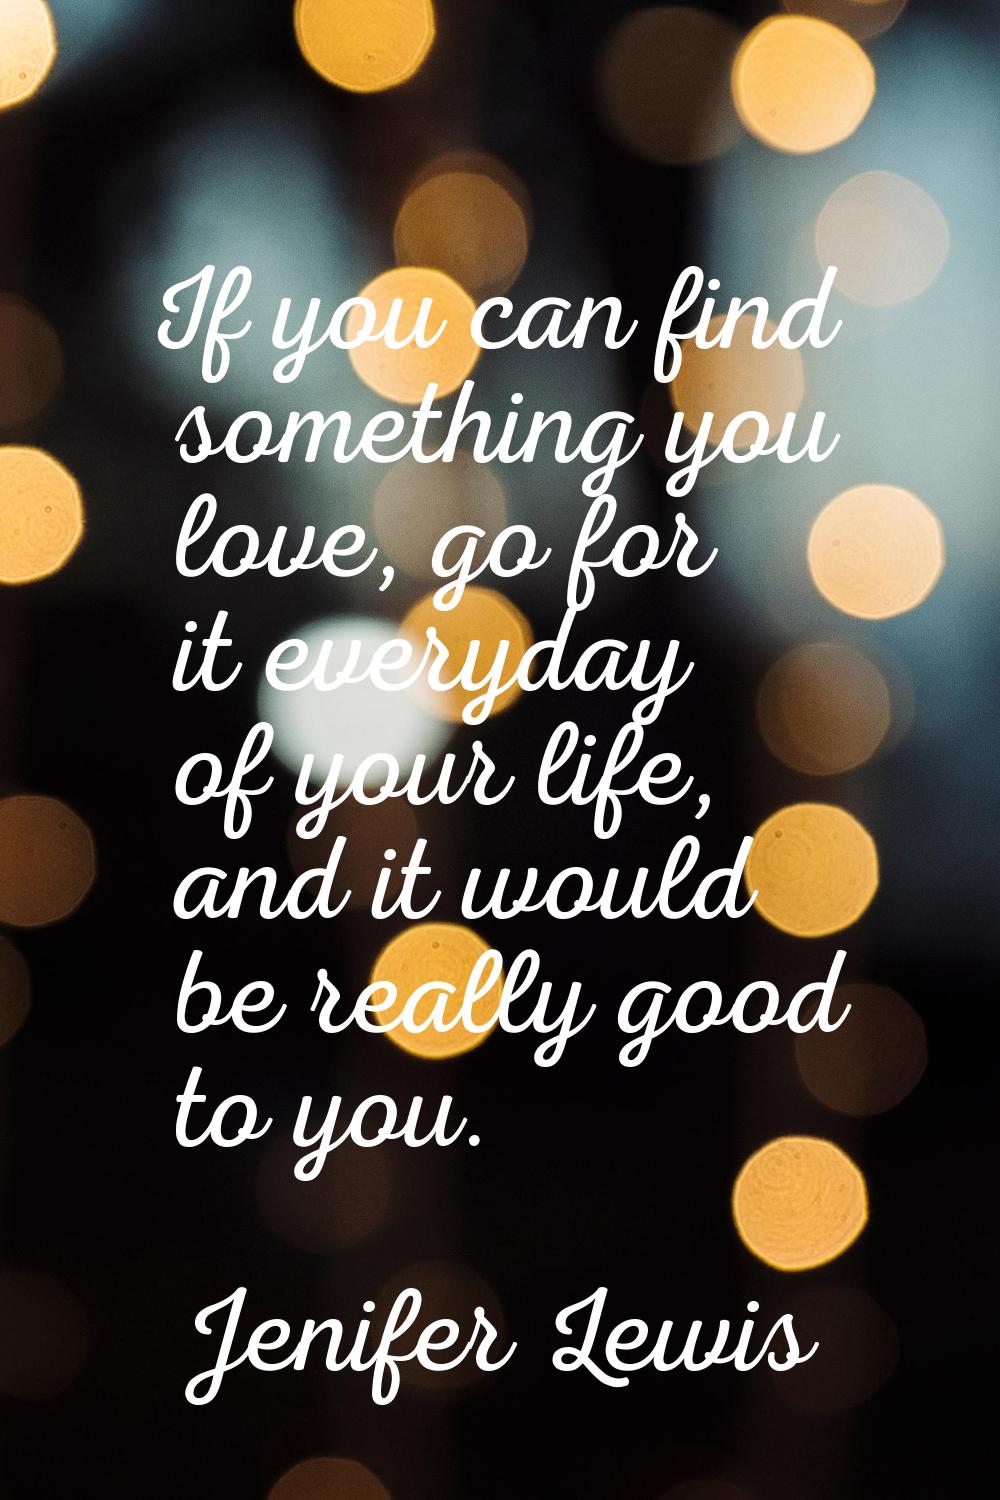 If you can find something you love, go for it everyday of your life, and it would be really good to